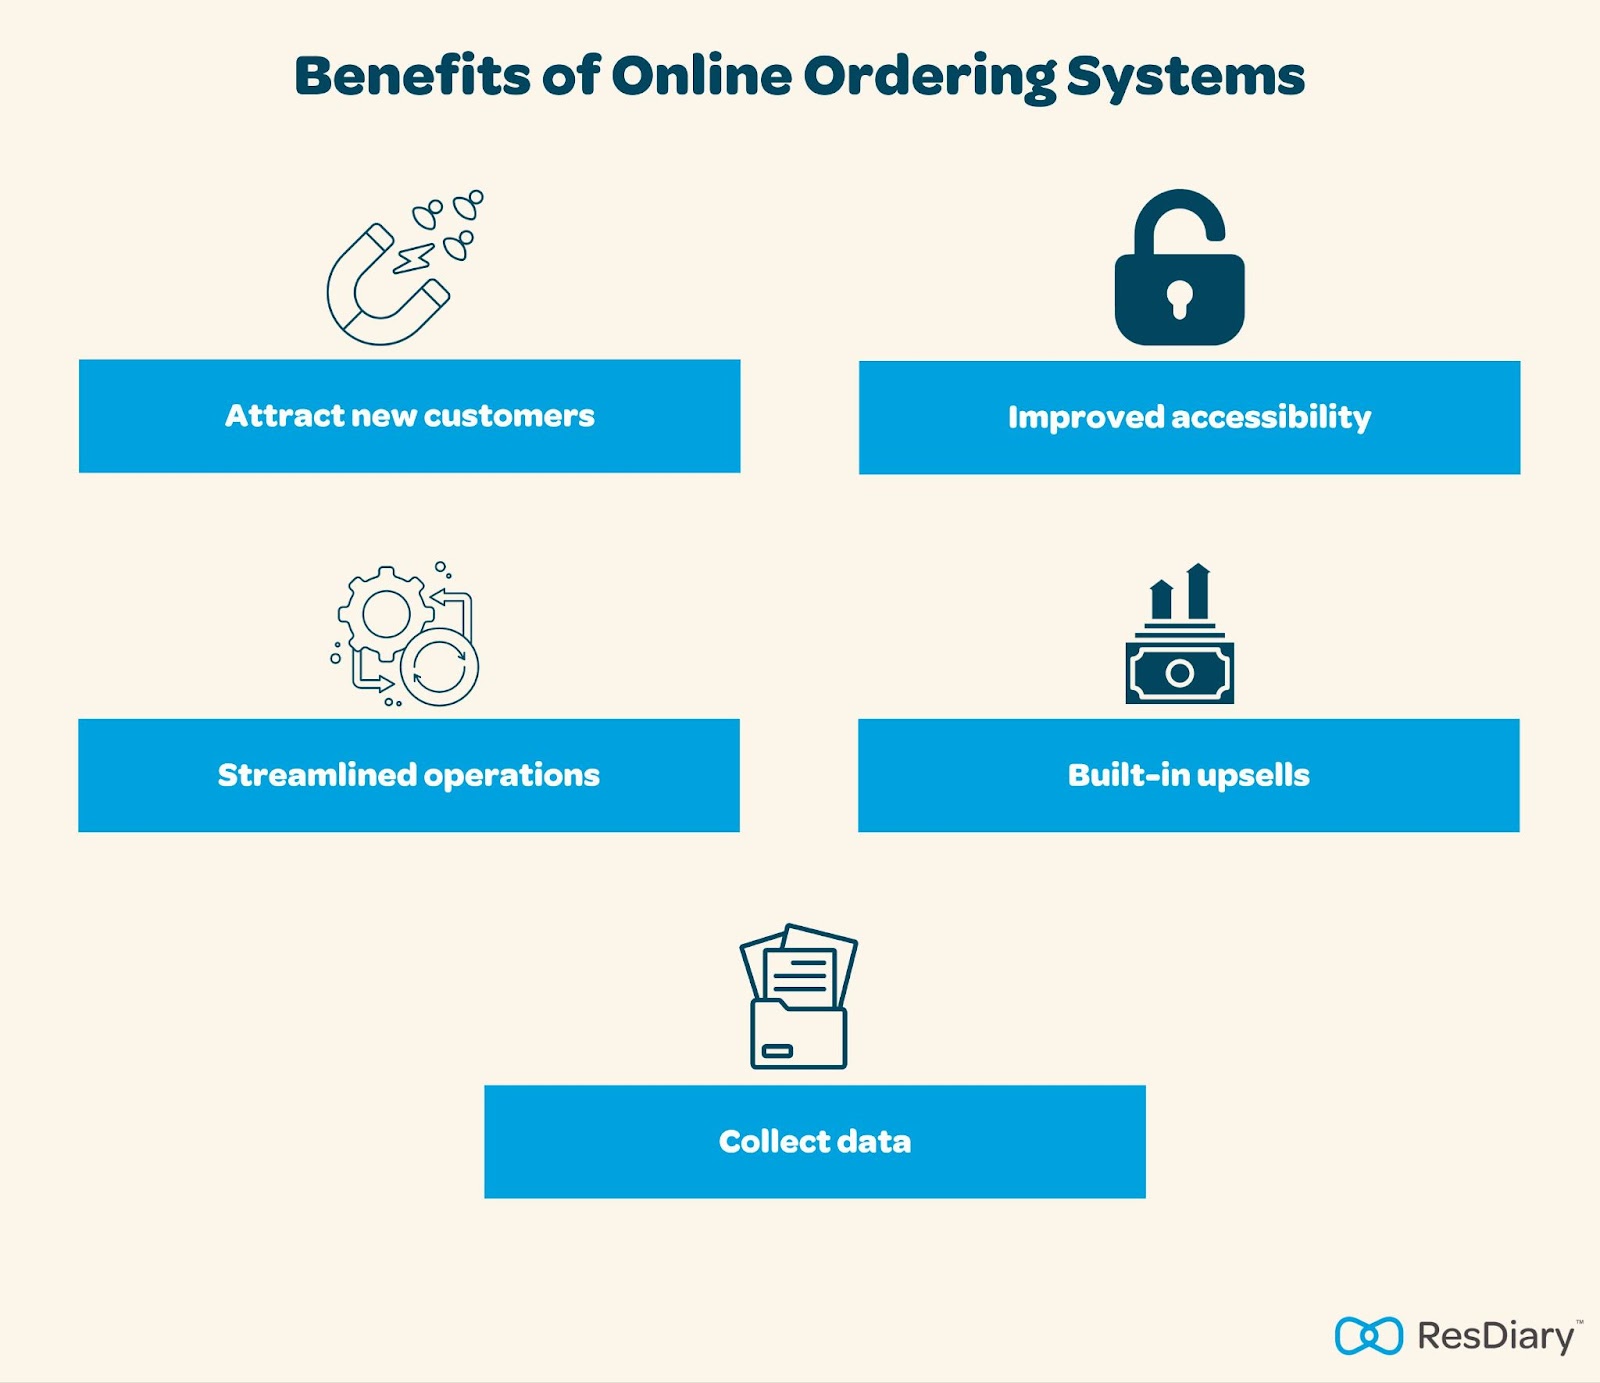 Benefits of restaurant online ordering systems